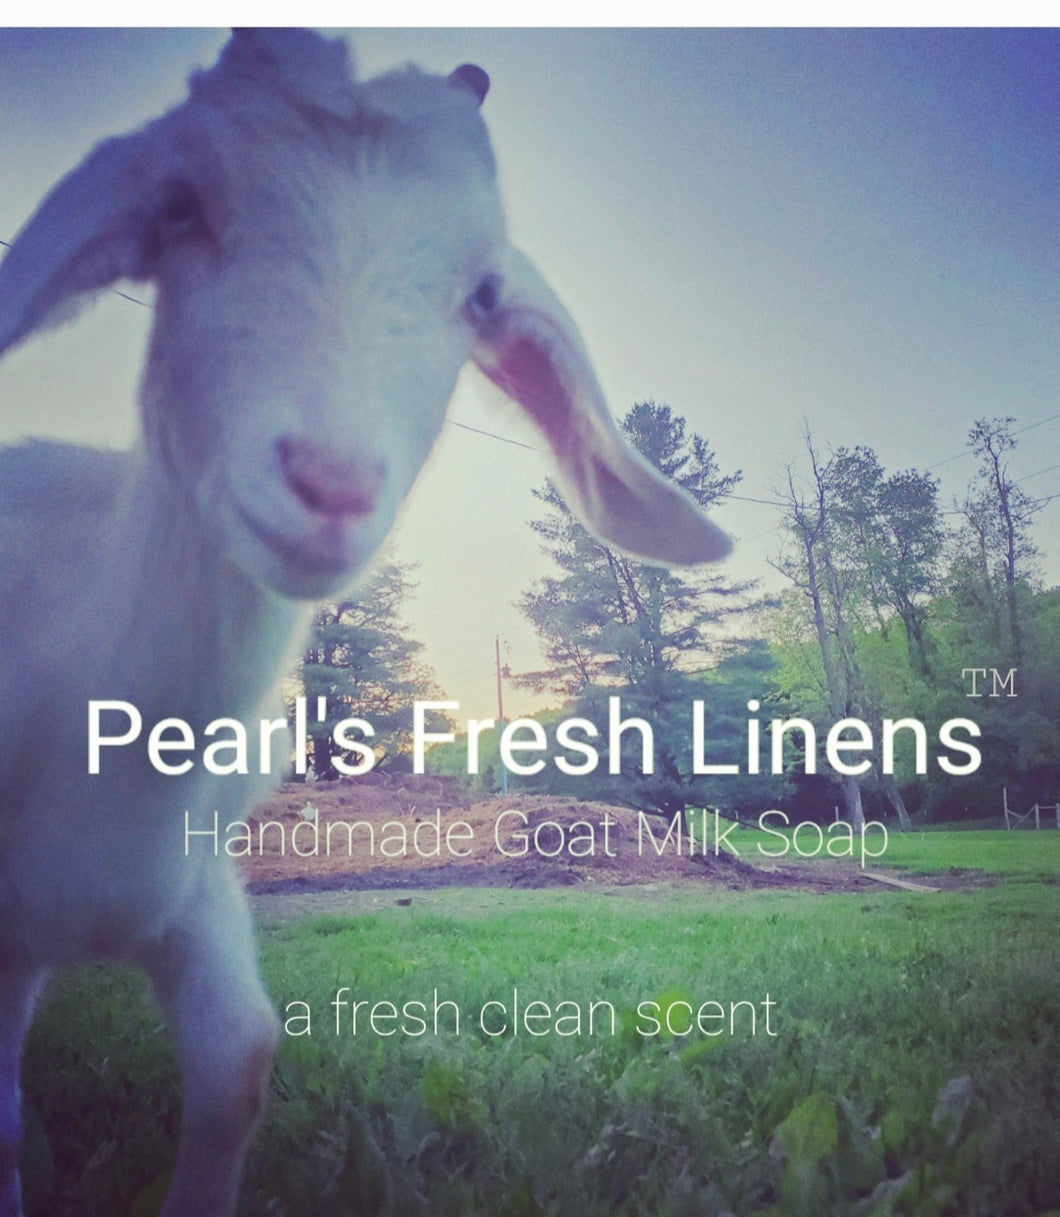 Pearl's Fresh Linens - Handcrafted Goat Milk Soap